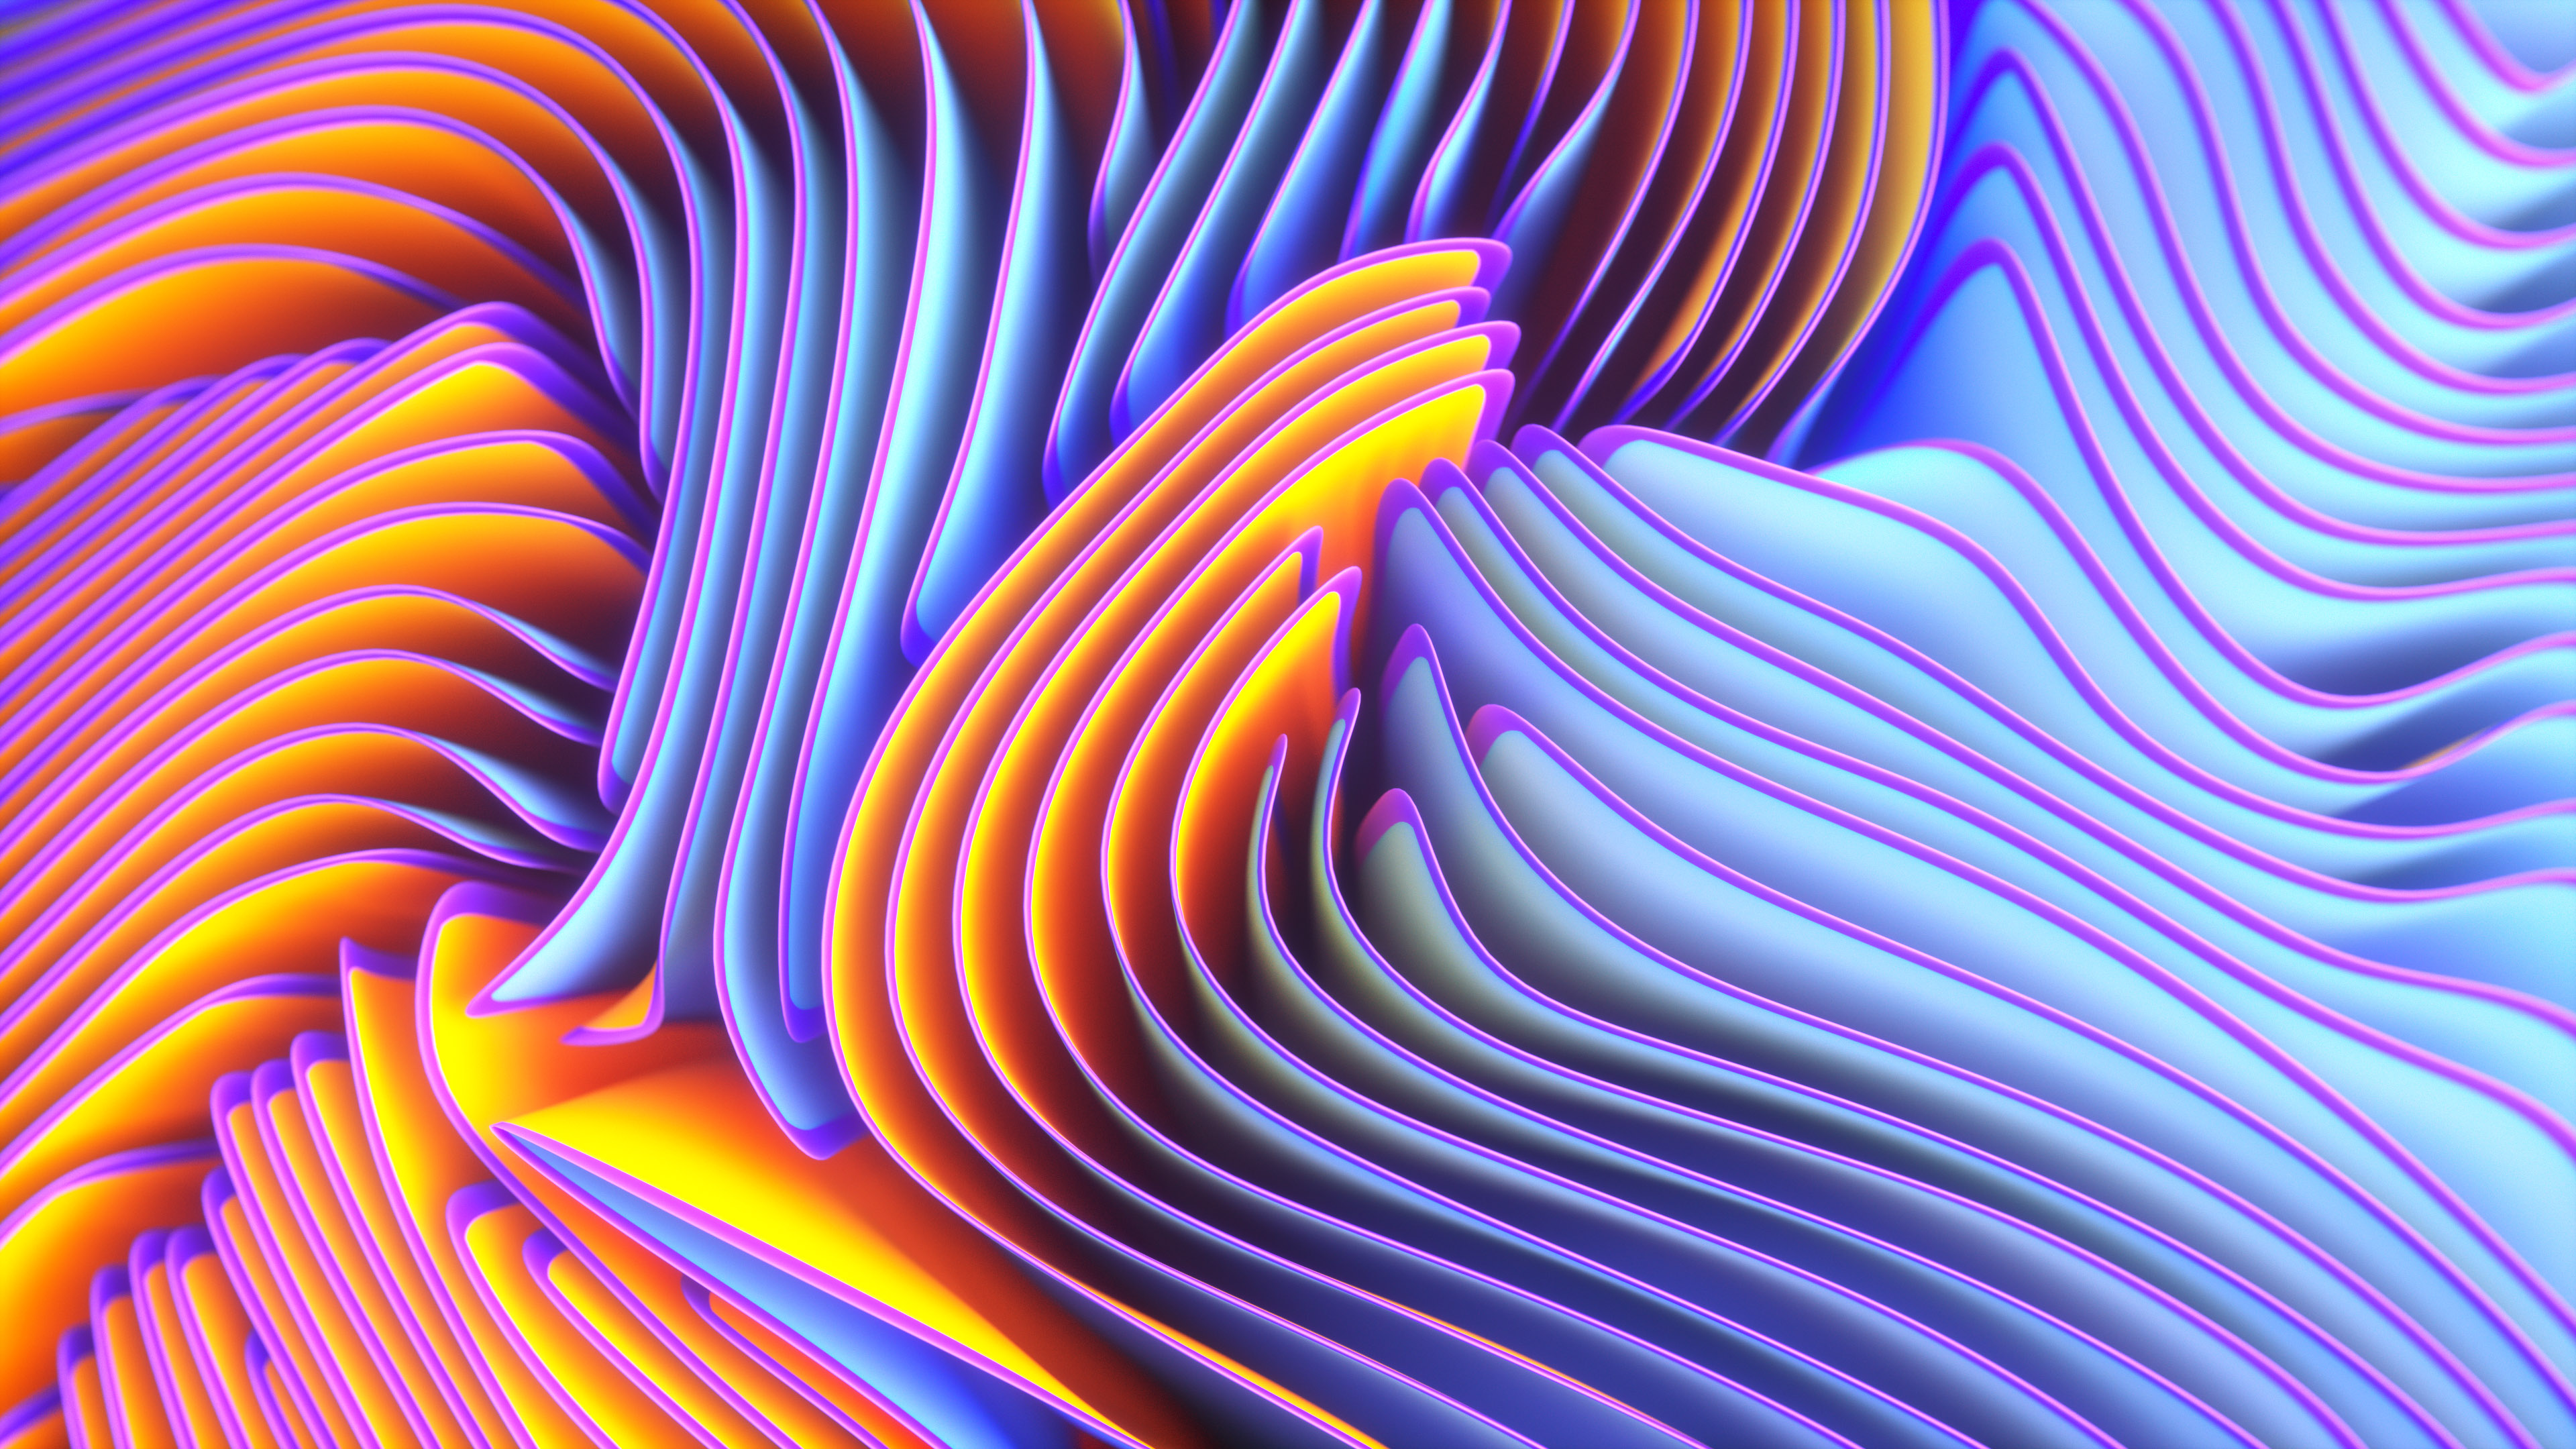 Ari Weinkle Twirl Abstract Colorful 3840x2160